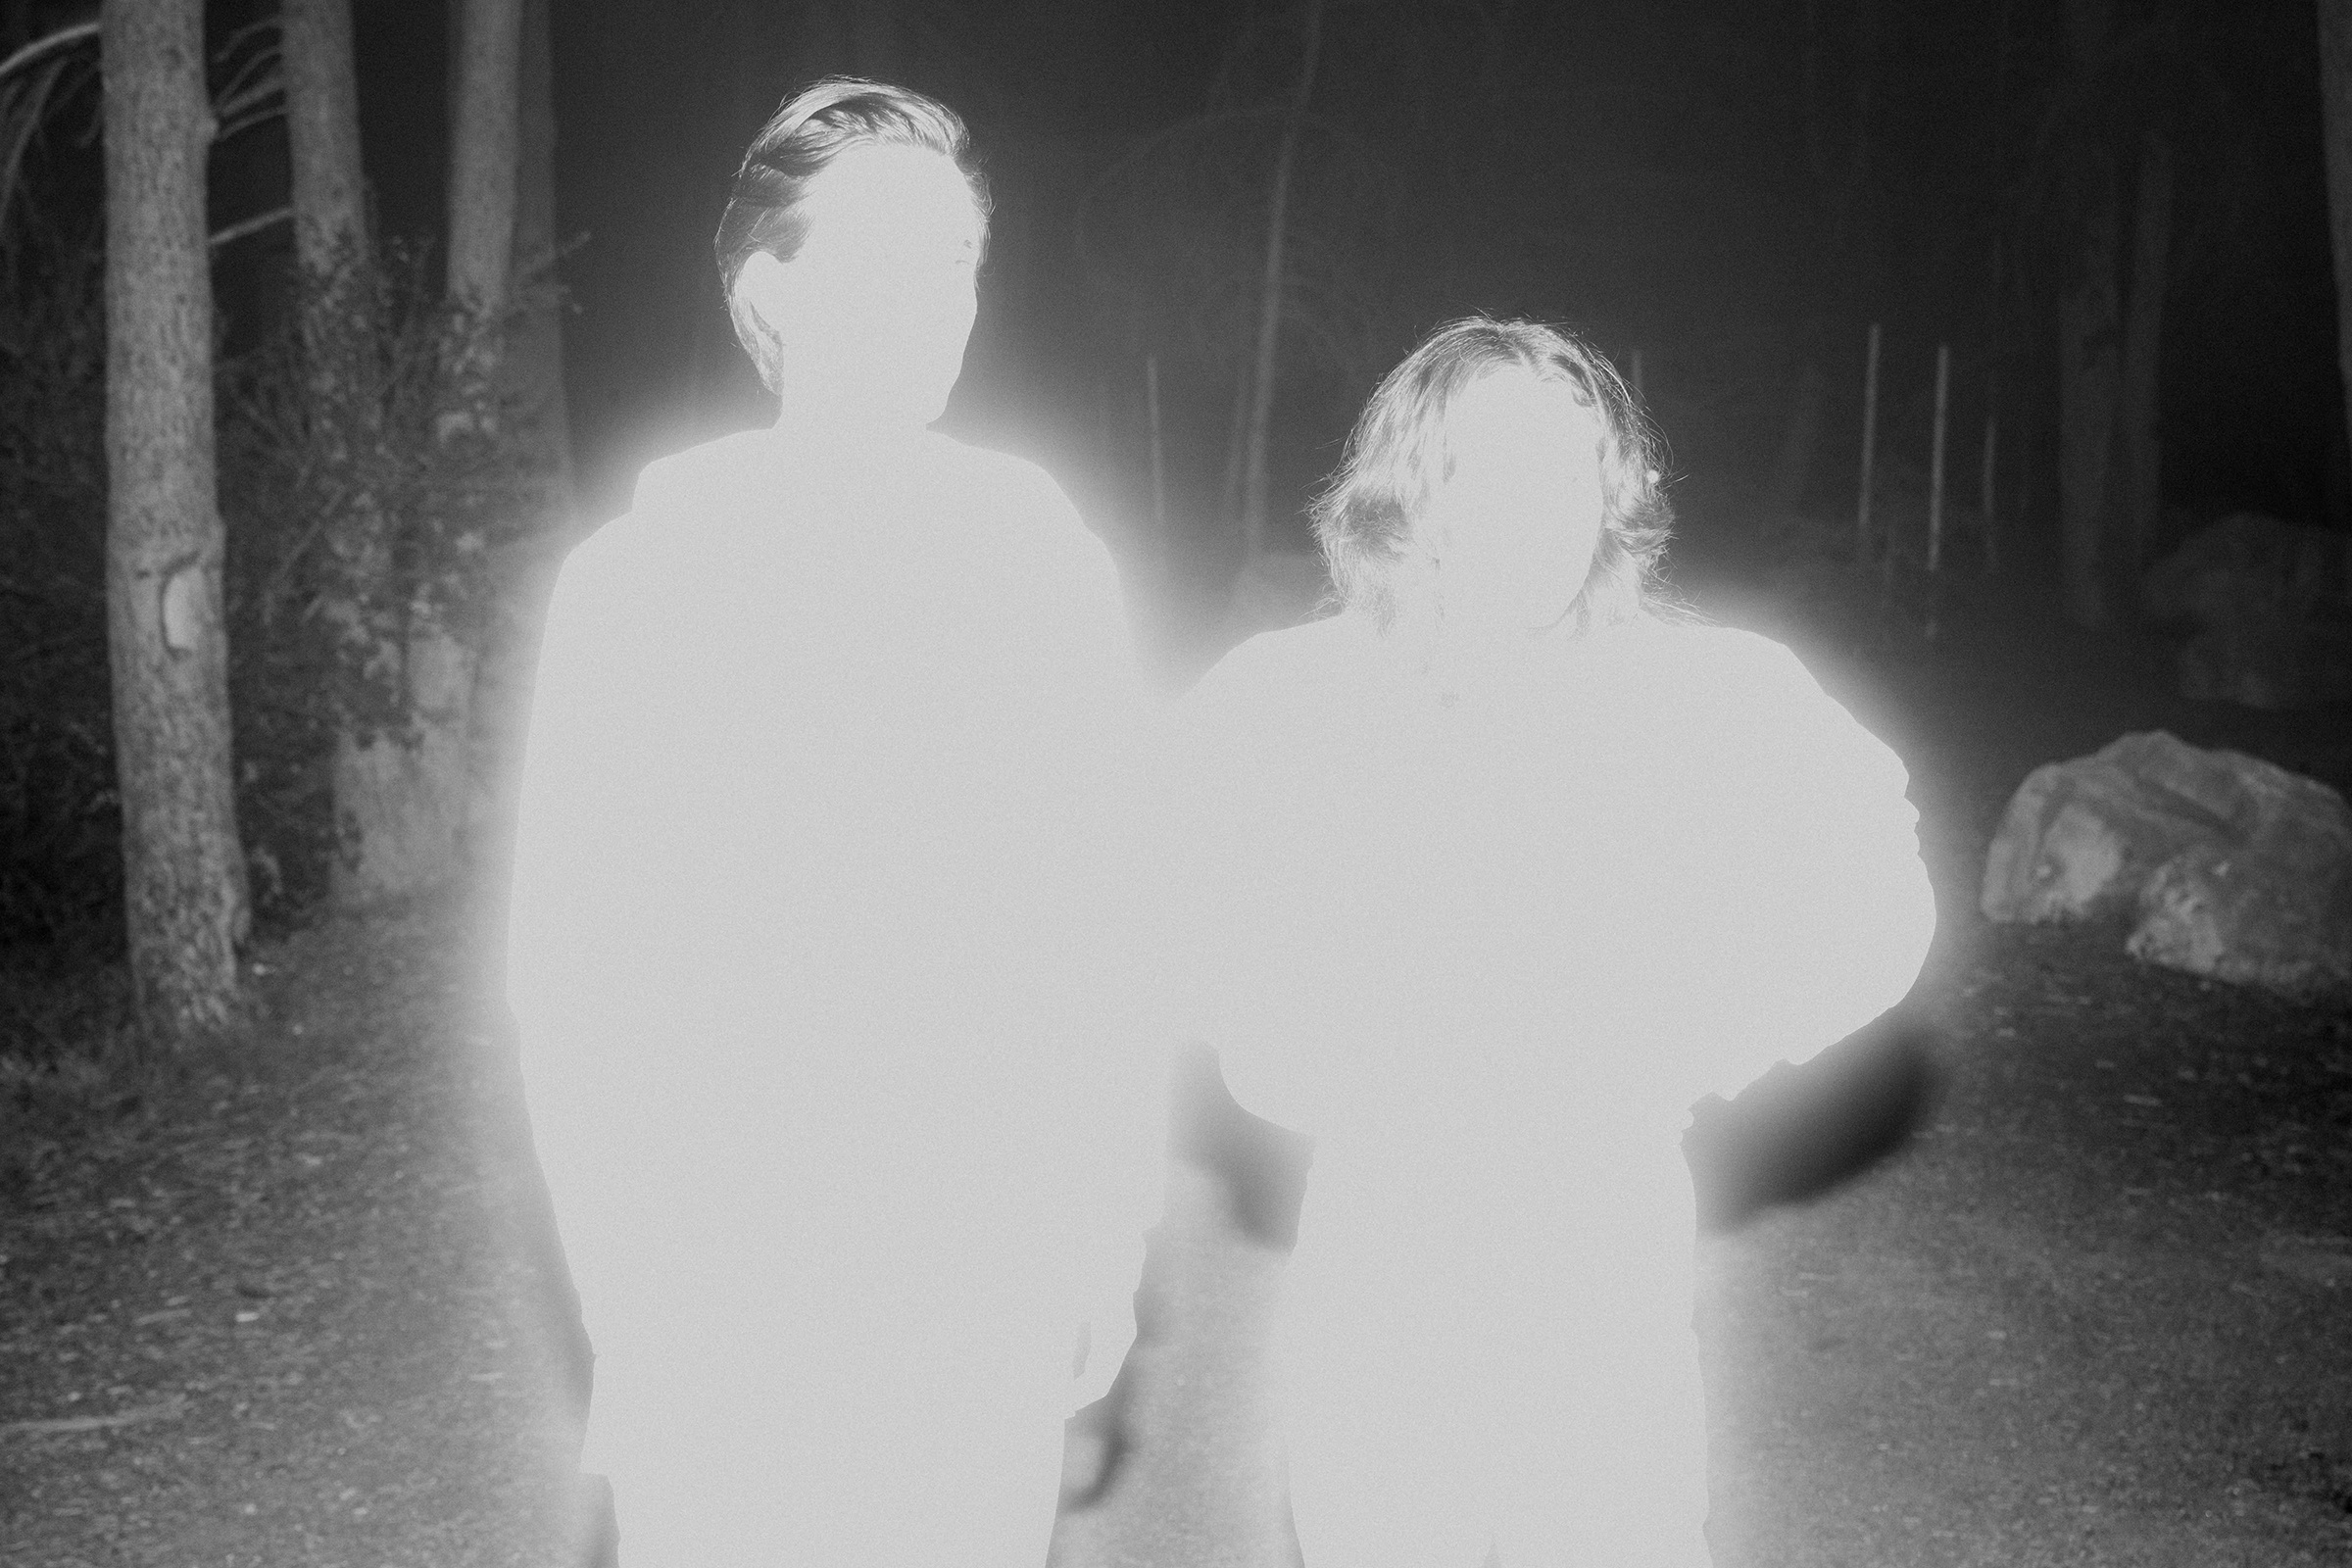 PURITY RING announce their third album WOMB out April 3rd 1